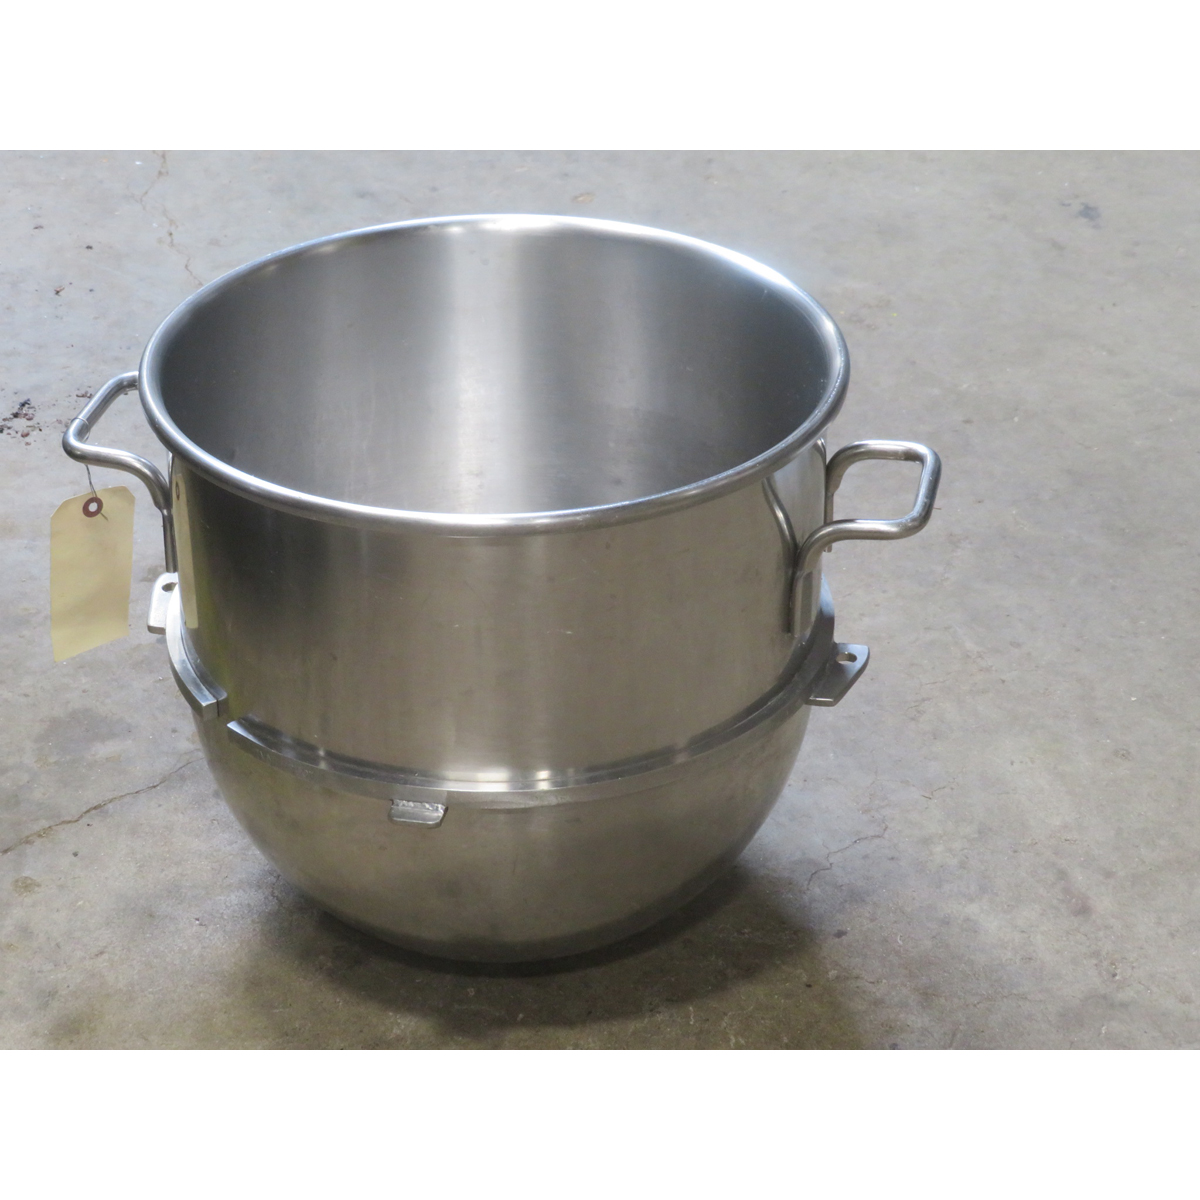 Hobart VMLHP40 40-Quart Bowl For 80 To 40 Bowl Adapter, Used Excellent Condition image 1